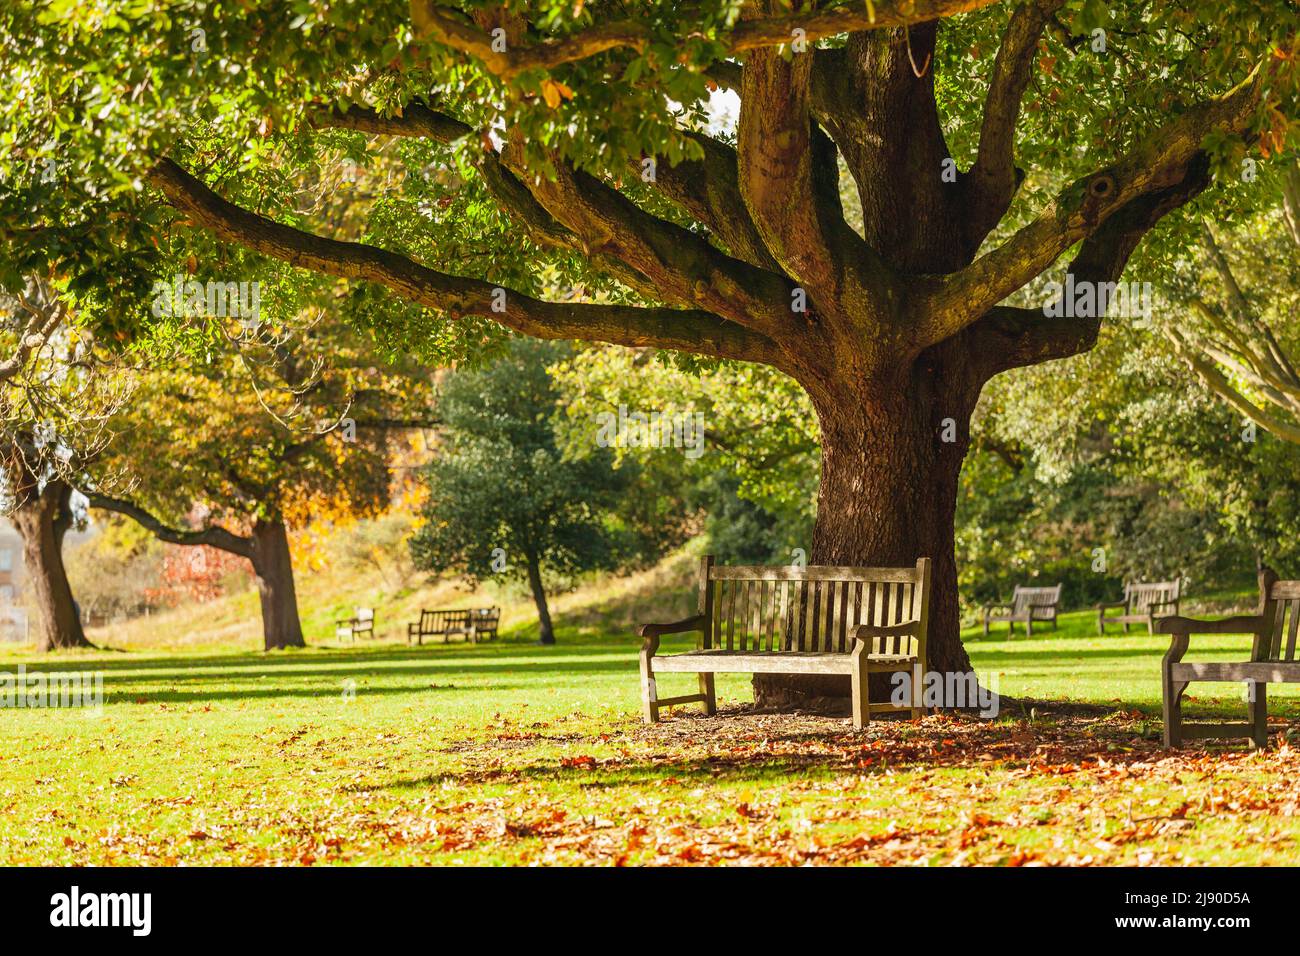 Wooden bench under the tree in the Royal Botanic Gardens, London, UK Stock Photo